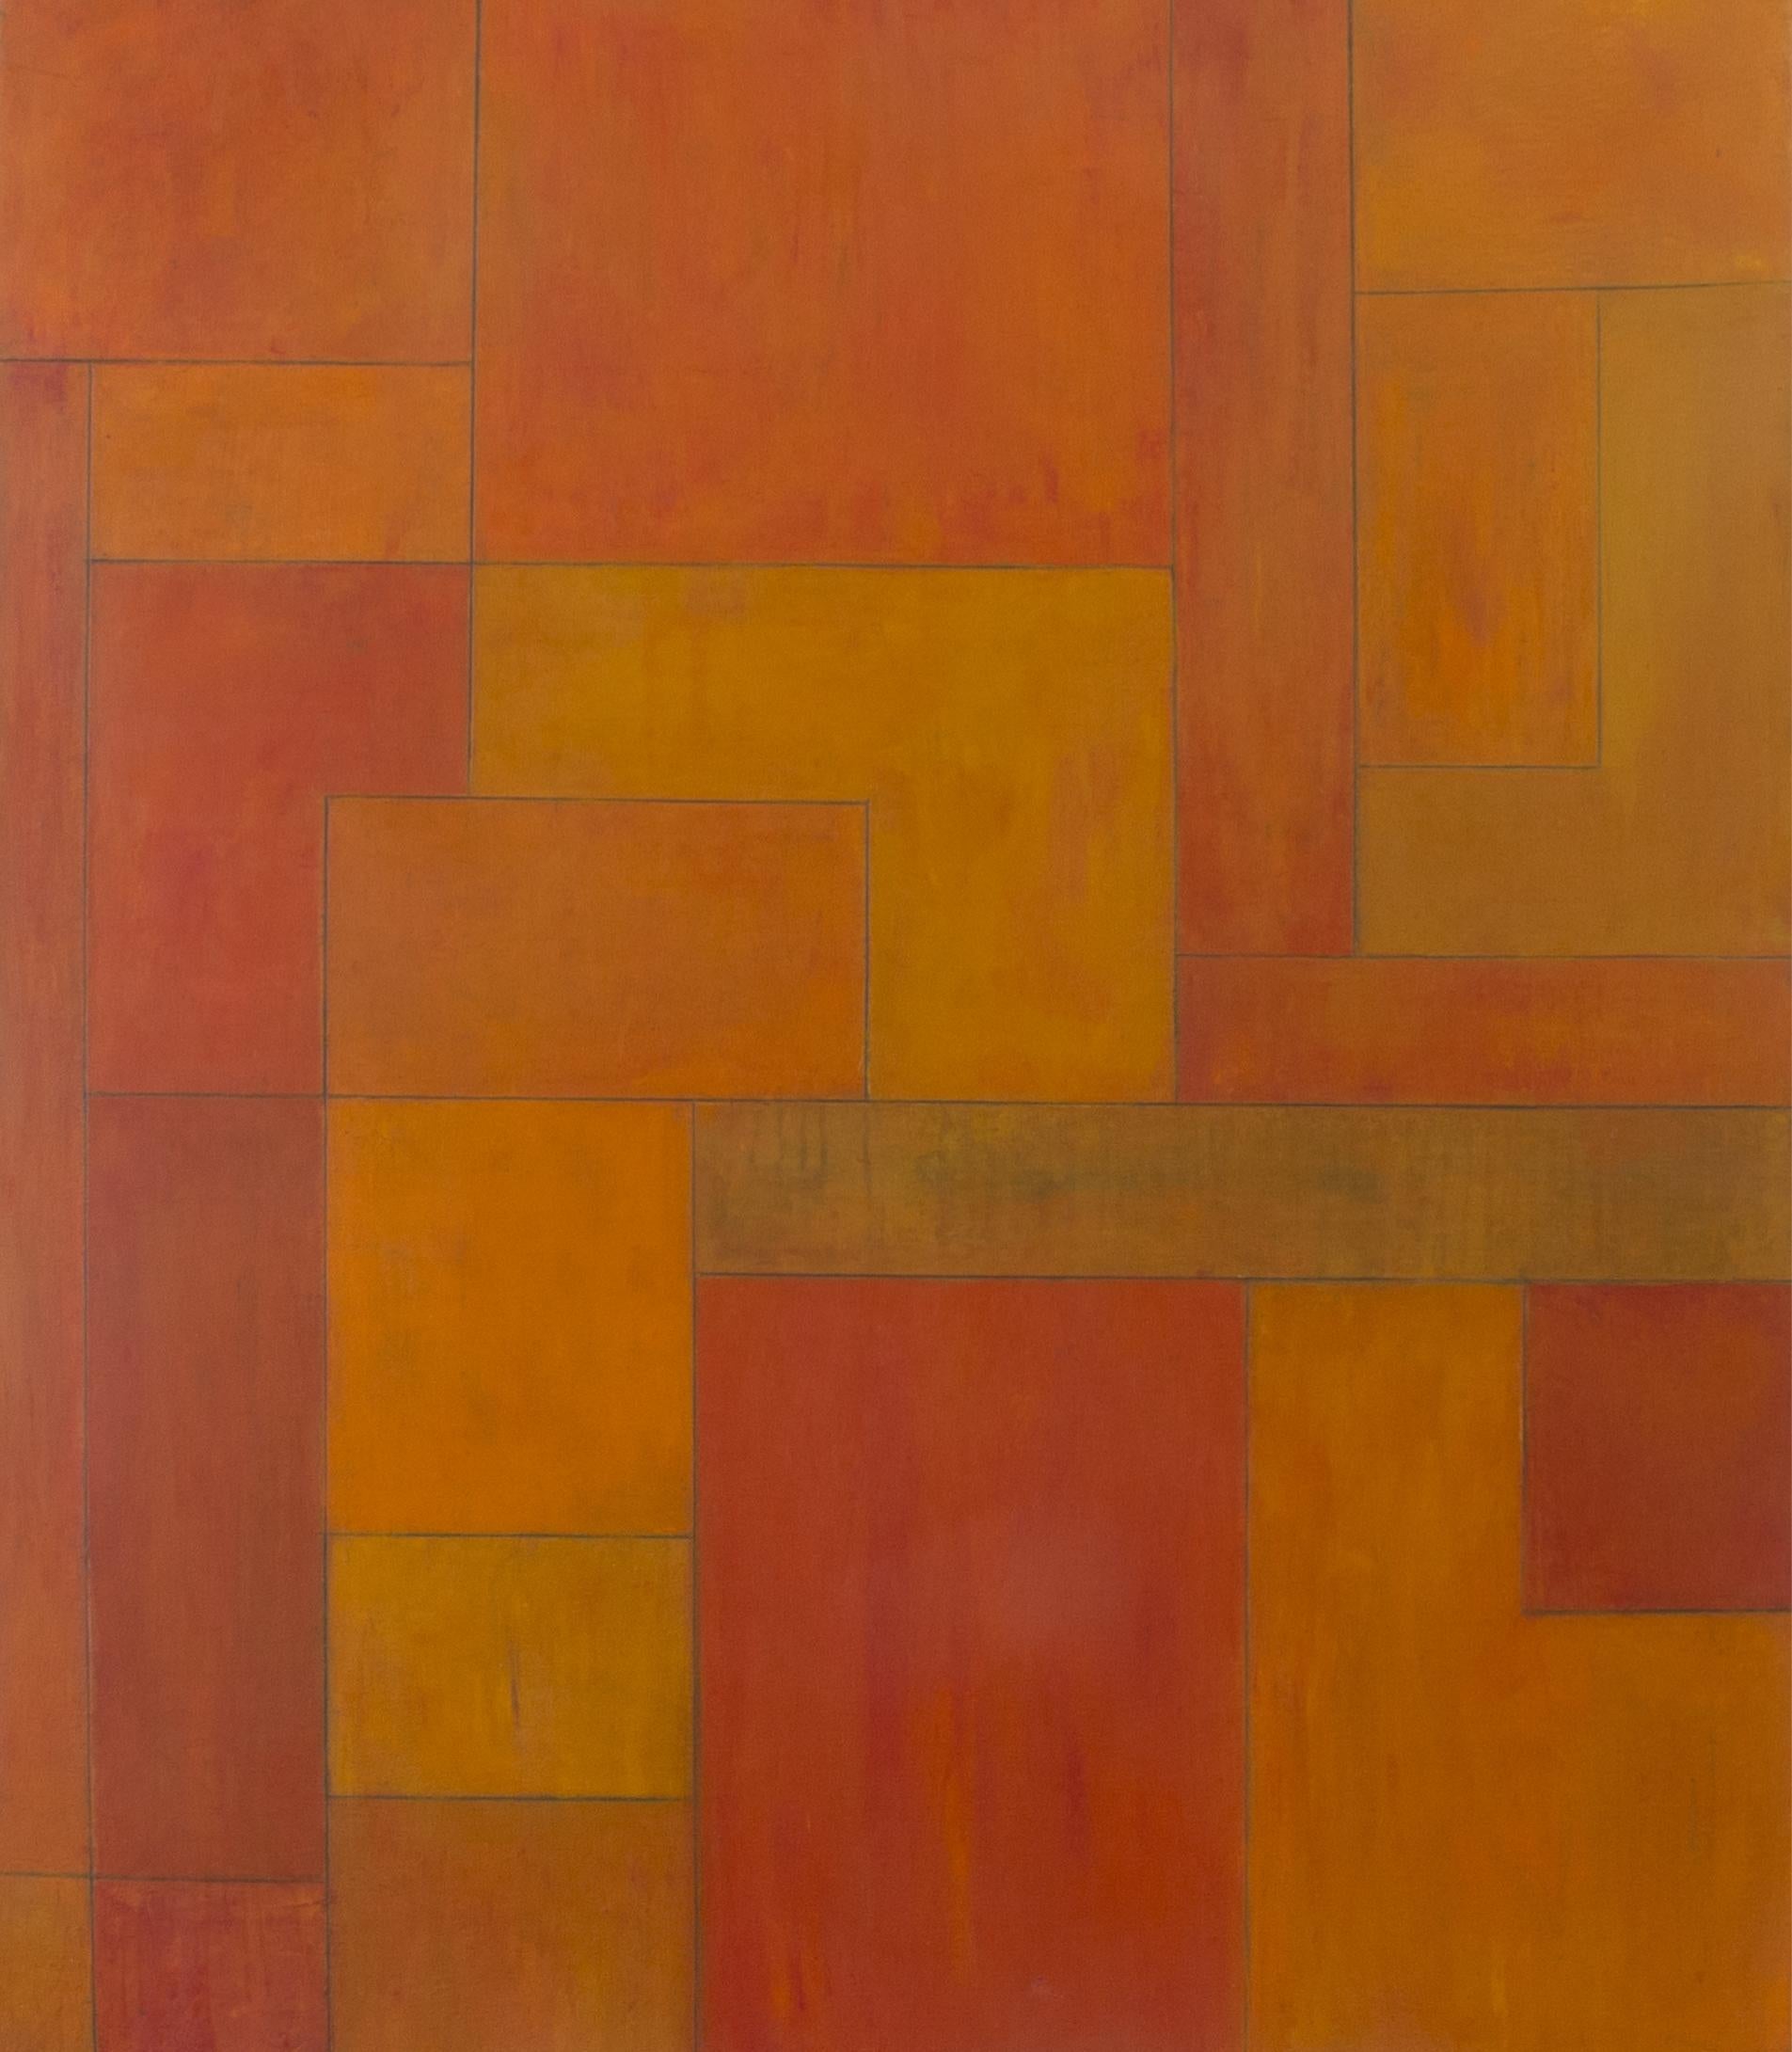 Stephen Cimini Abstract Painting - gold zone, Painting, Oil on Canvas